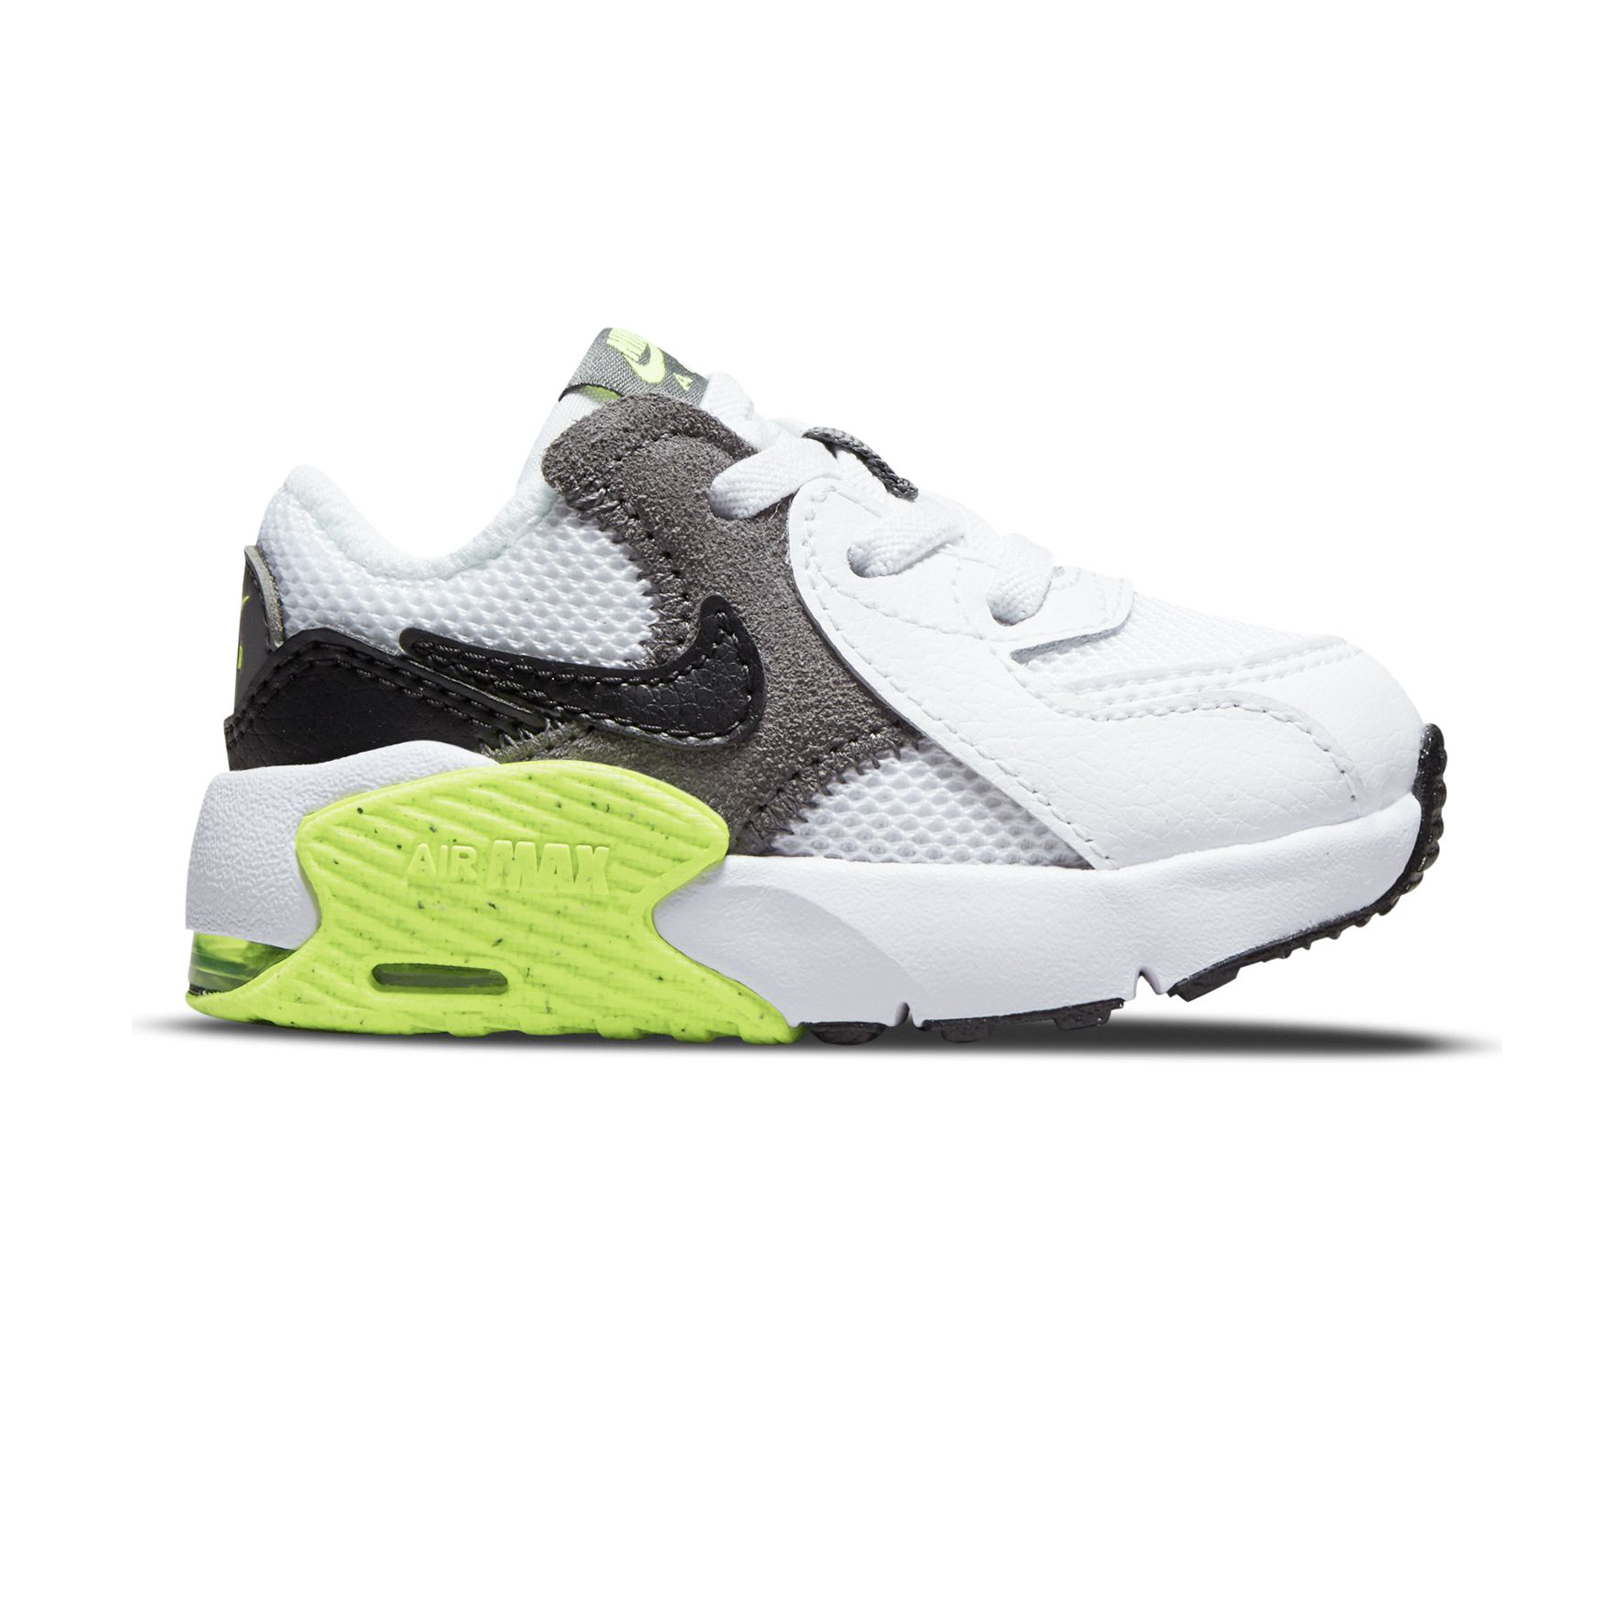 Nike - NIKE AIR MAX EXCEE (TD) - WHITE/BLACK-IRON GREY-VOLT Παιδικά > Παπούτσια > Sneaker > Παπούτσι Low Cut